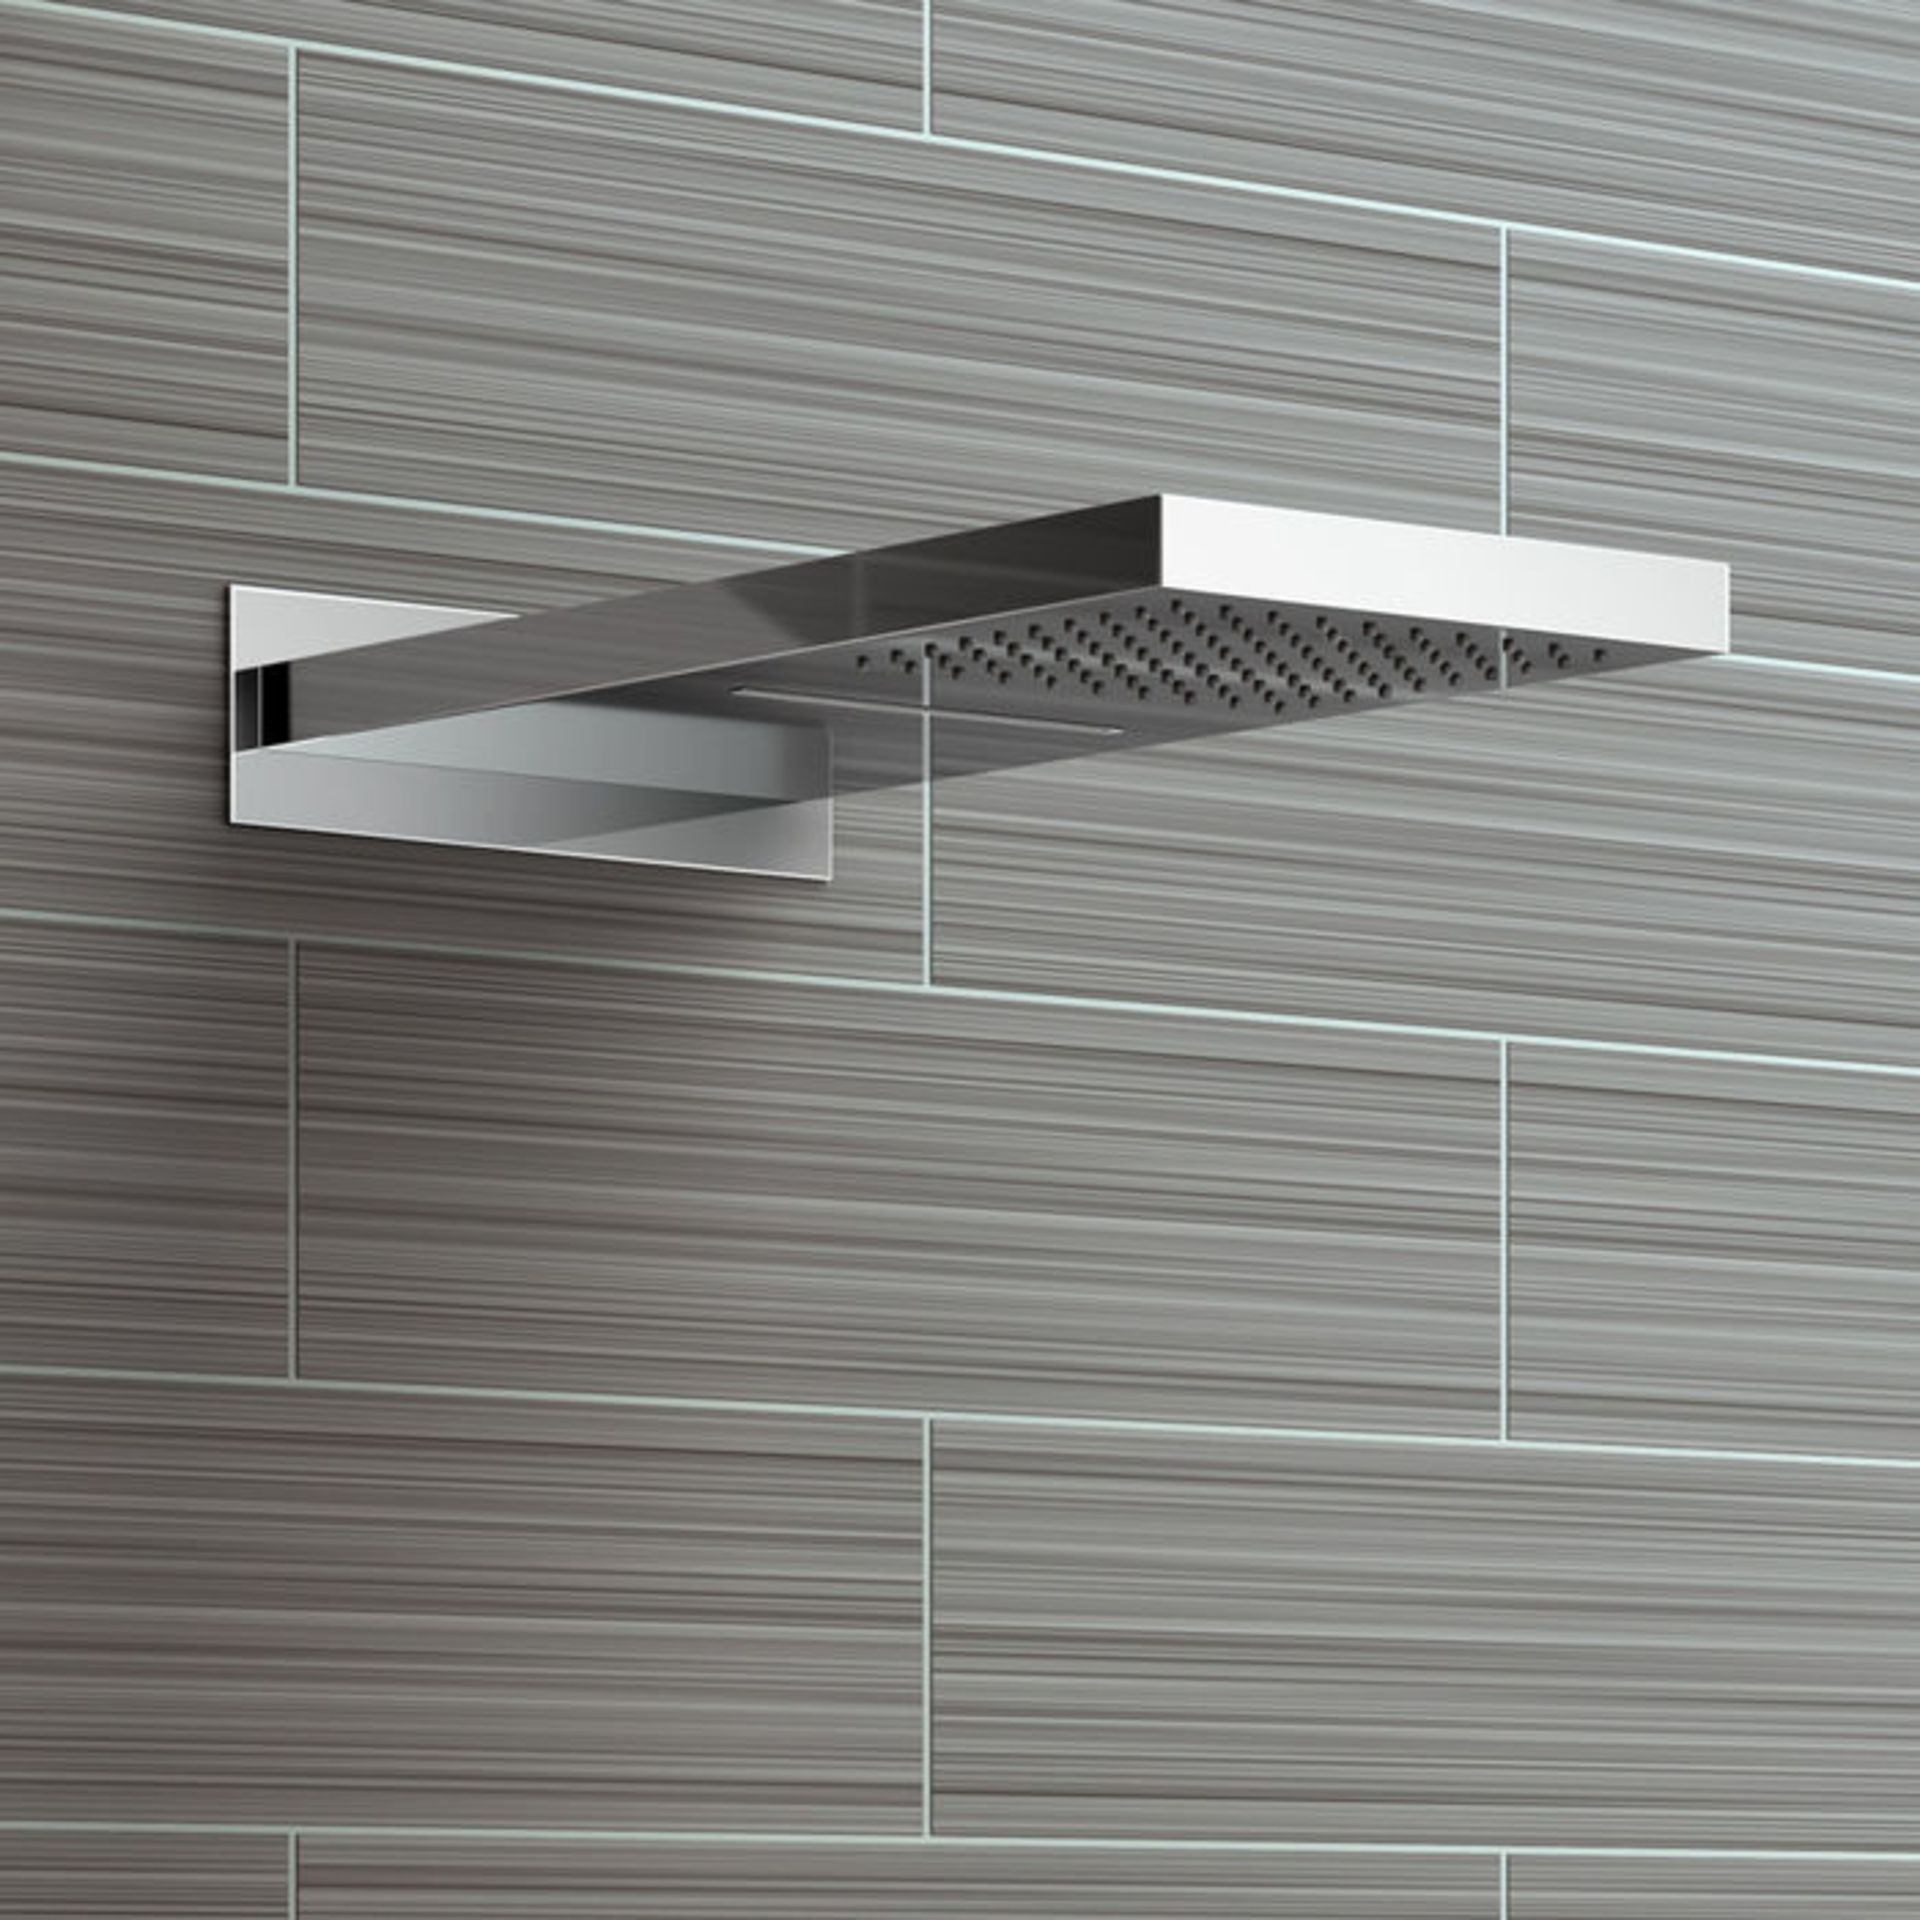 (TY171) 230x500mm Stainless Steel Waterfall Shower Head. RRP £374.99. Dual function waterfall and - Image 4 of 4